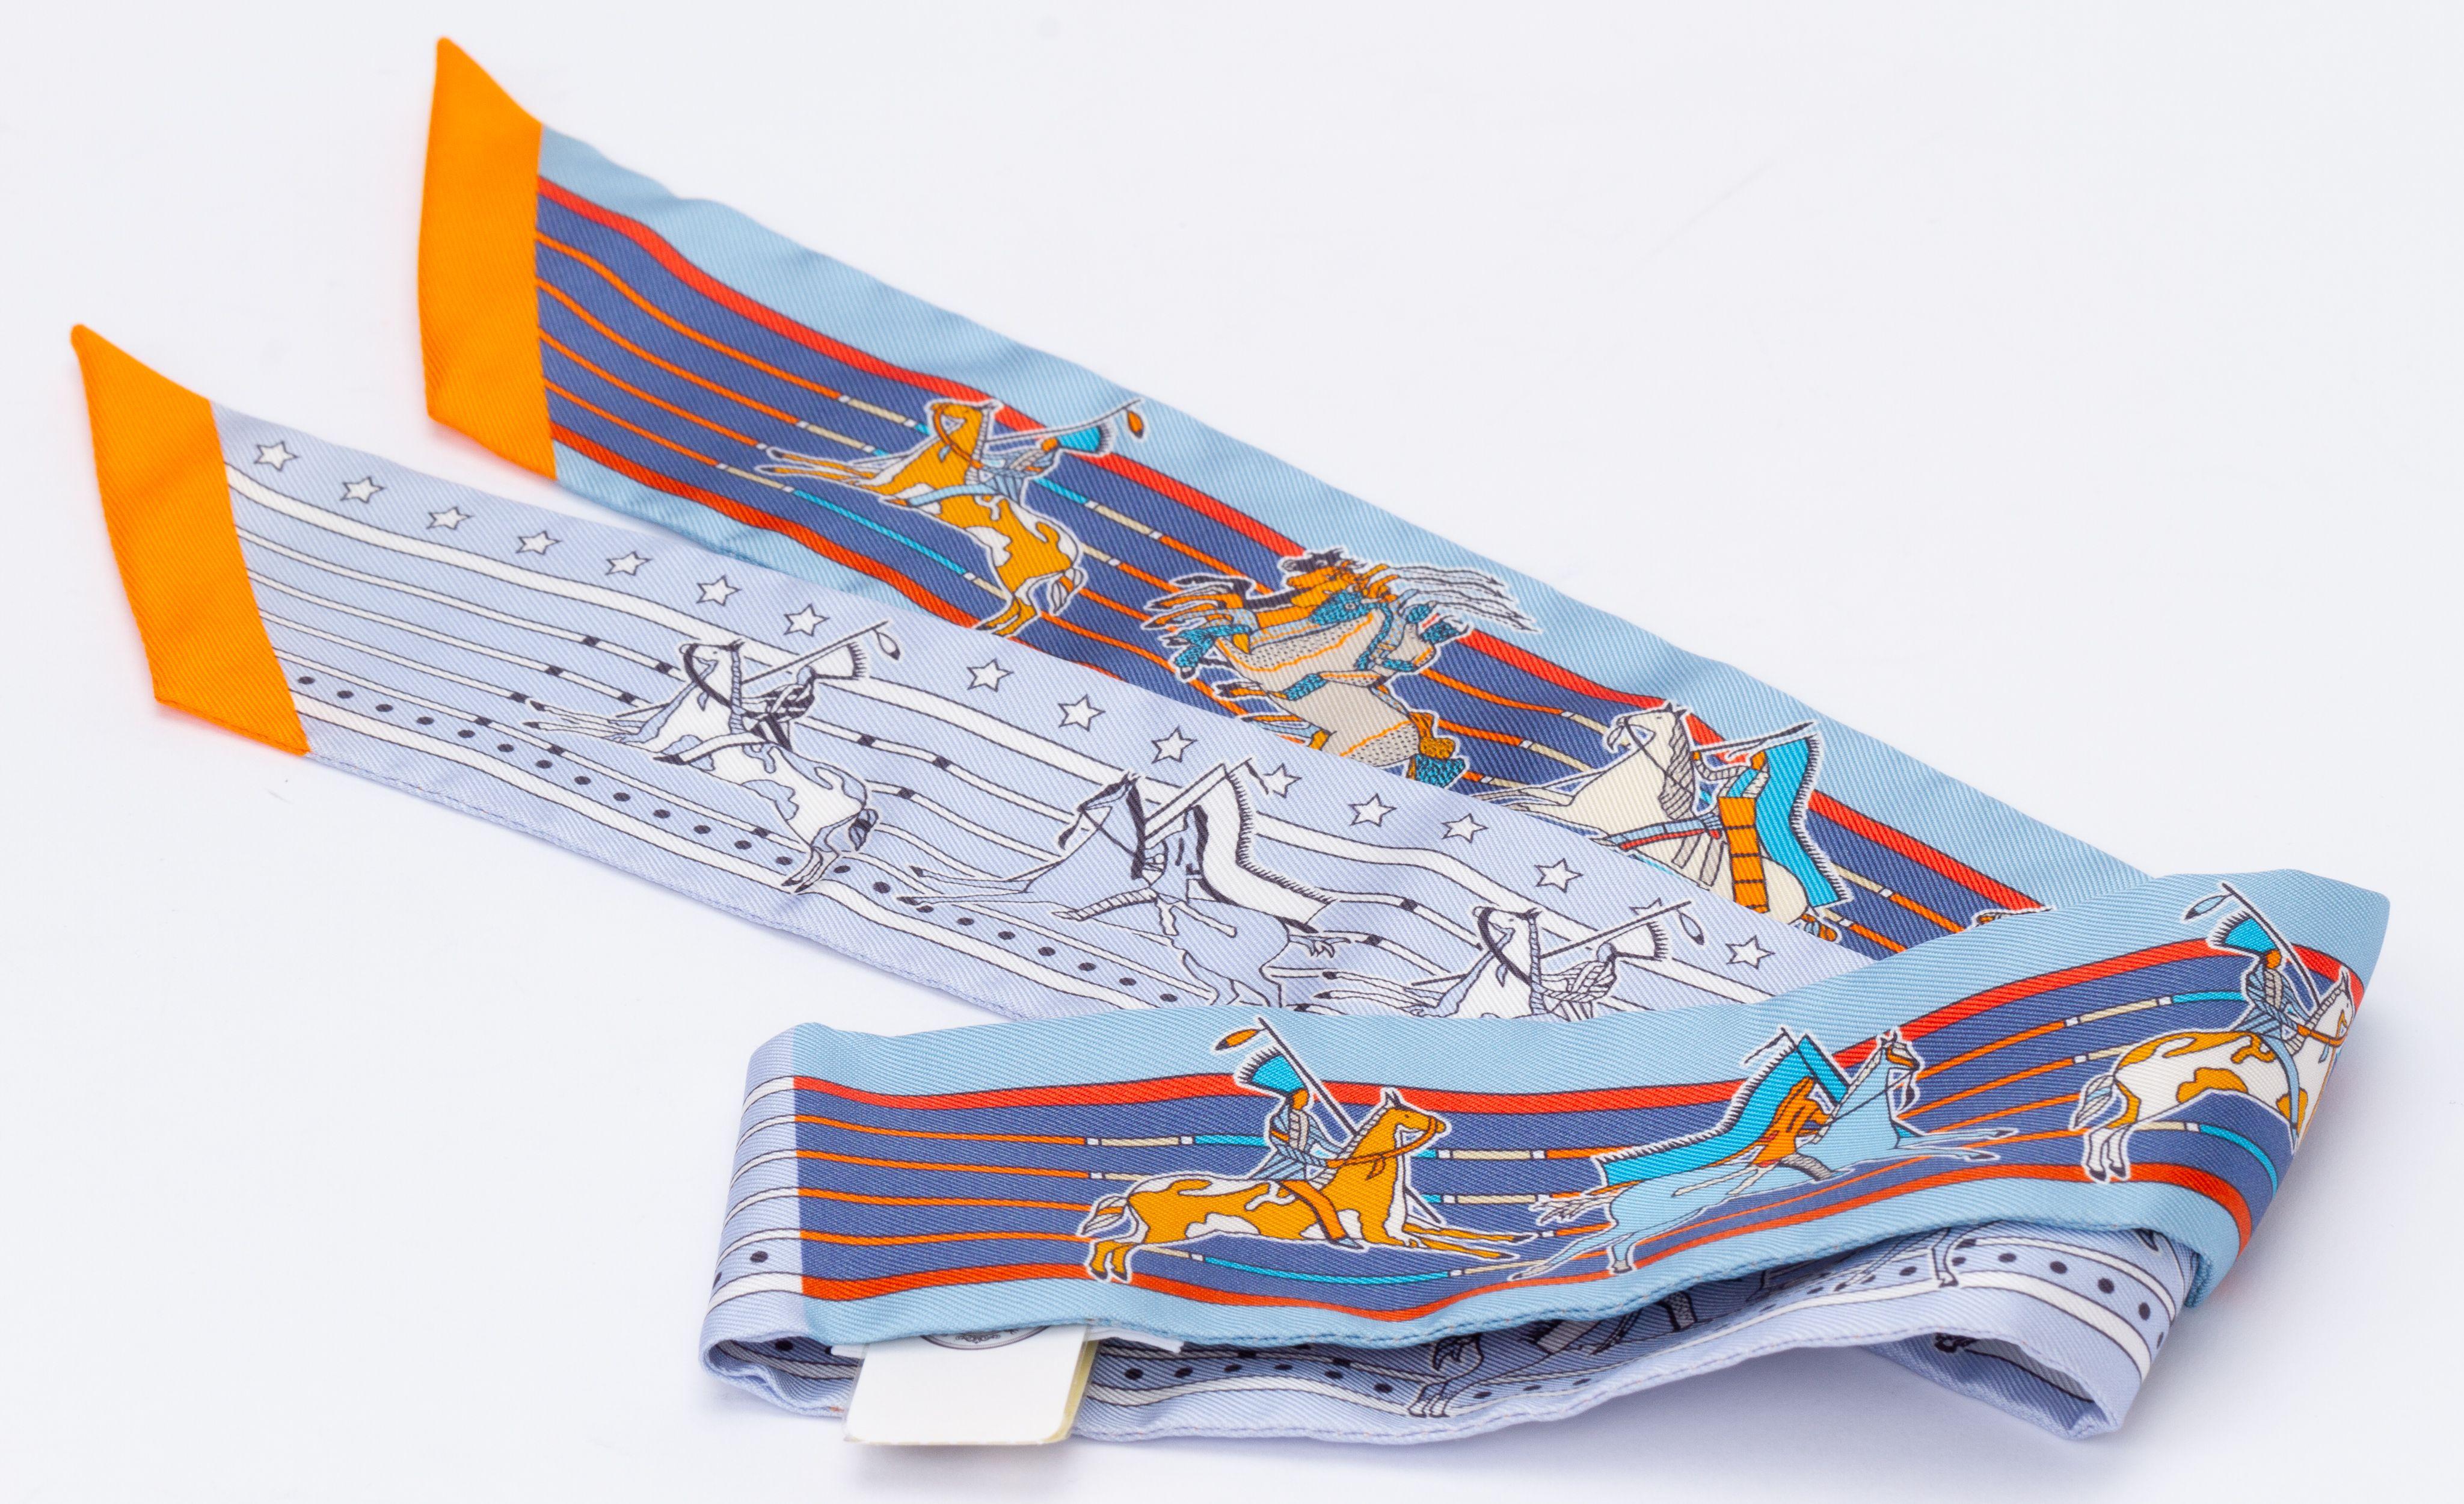 New Hermès twilly from the Kachinas edition. The piece is made out of silk and has a multicolor print with different characters shown. It comes in the original box closed with the Hermès ribbon.